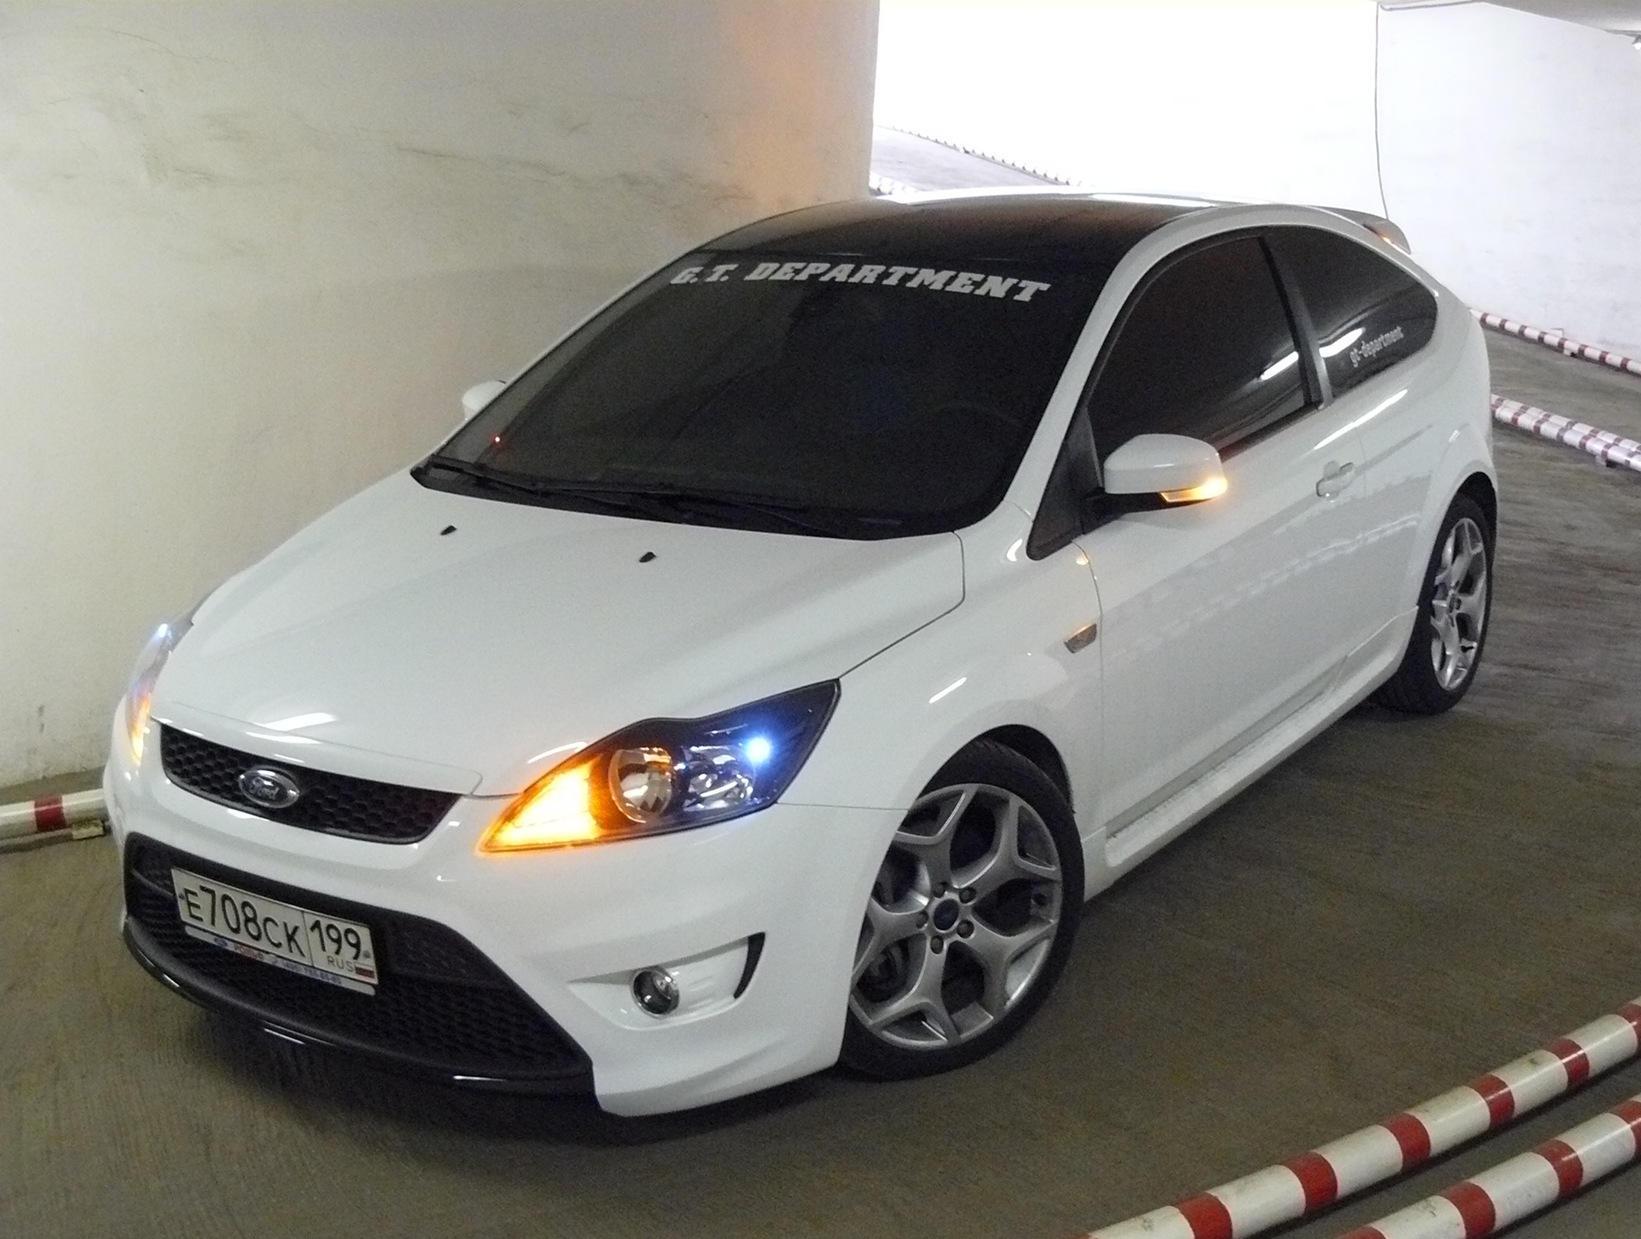 Ford Focus RS - Car and Driver